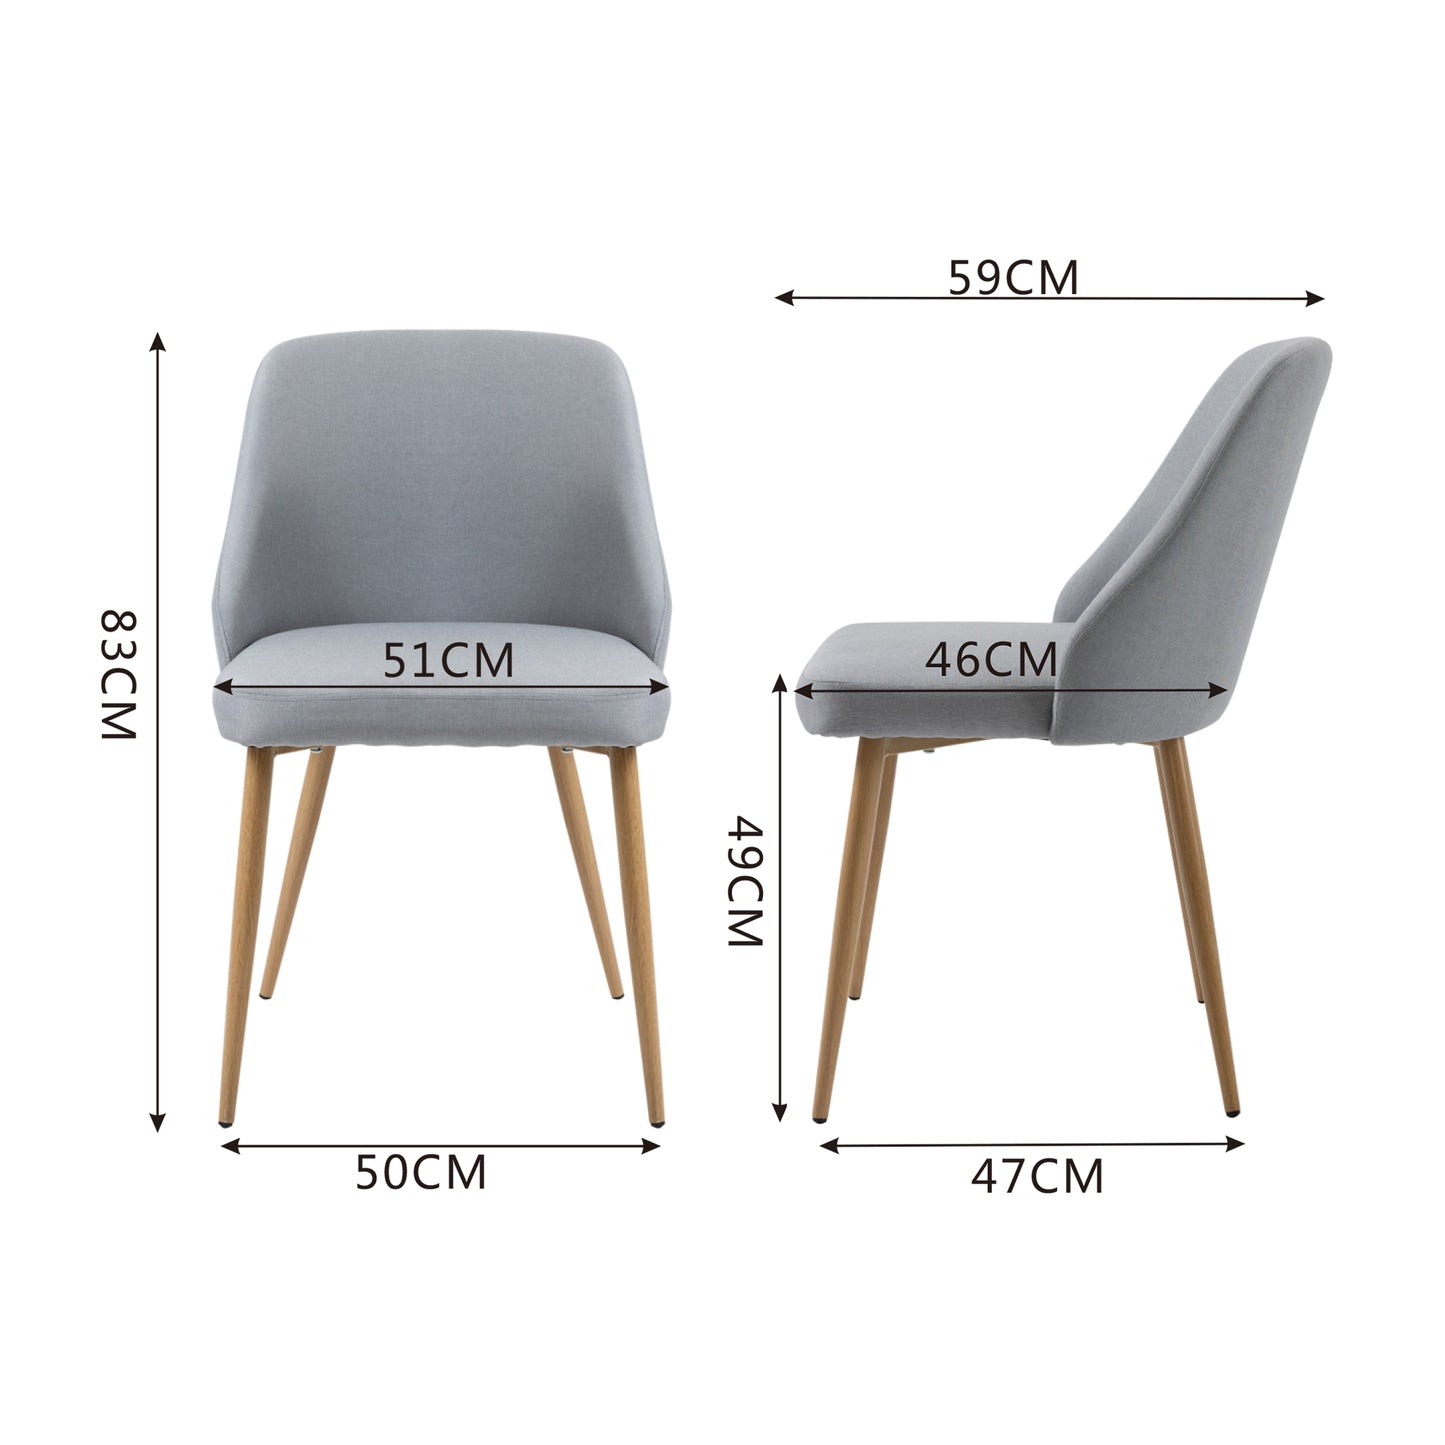 CHOTTO - Niko Dining Chairs - Grey (Set of 2)